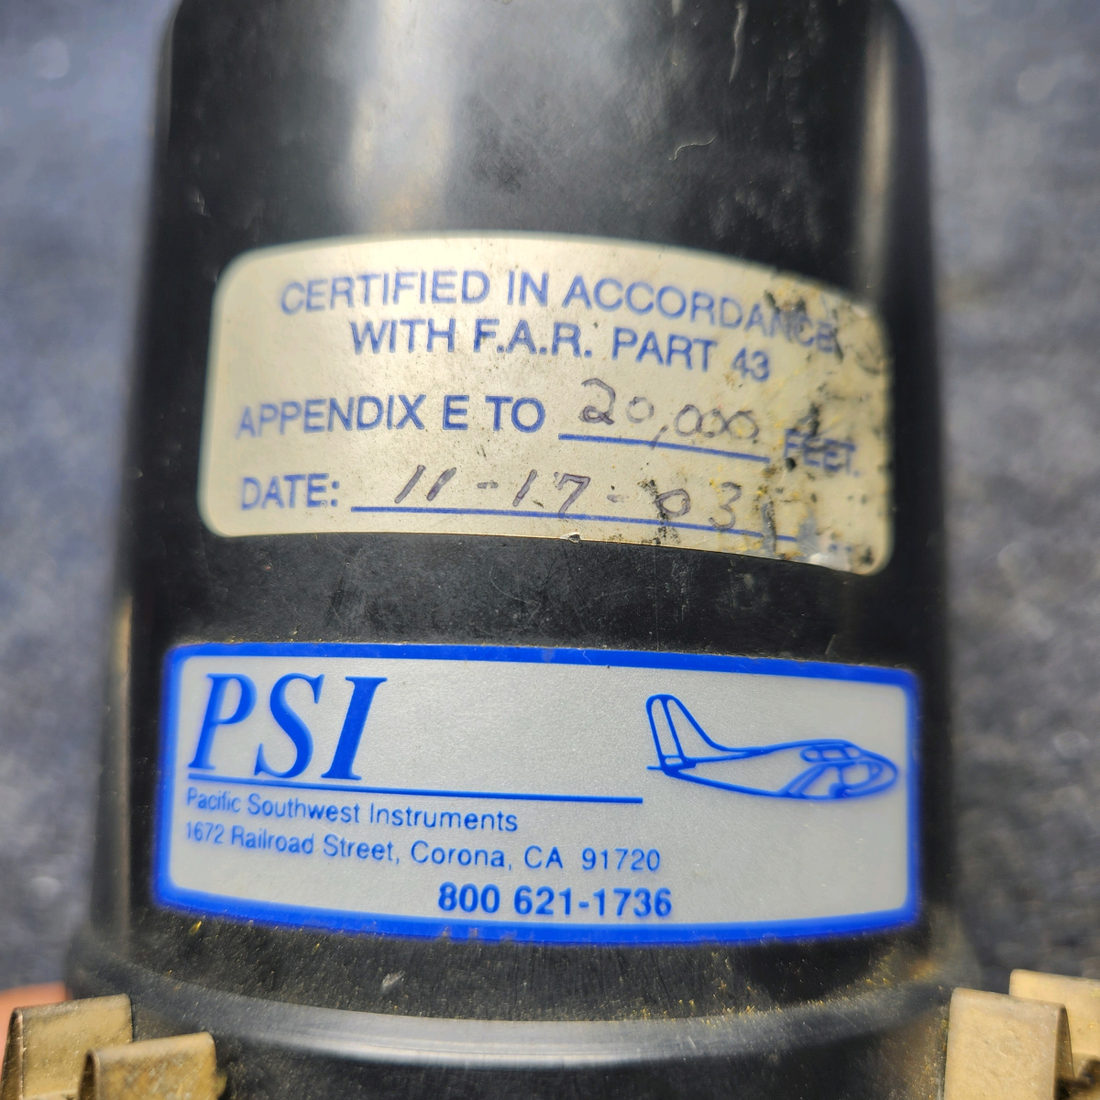 Used aircraft parts for sale, 5934P-3 PIPER PA28-140 UNITED INSTRUMENTS ALTIMETER ALTITUDE GAUGE